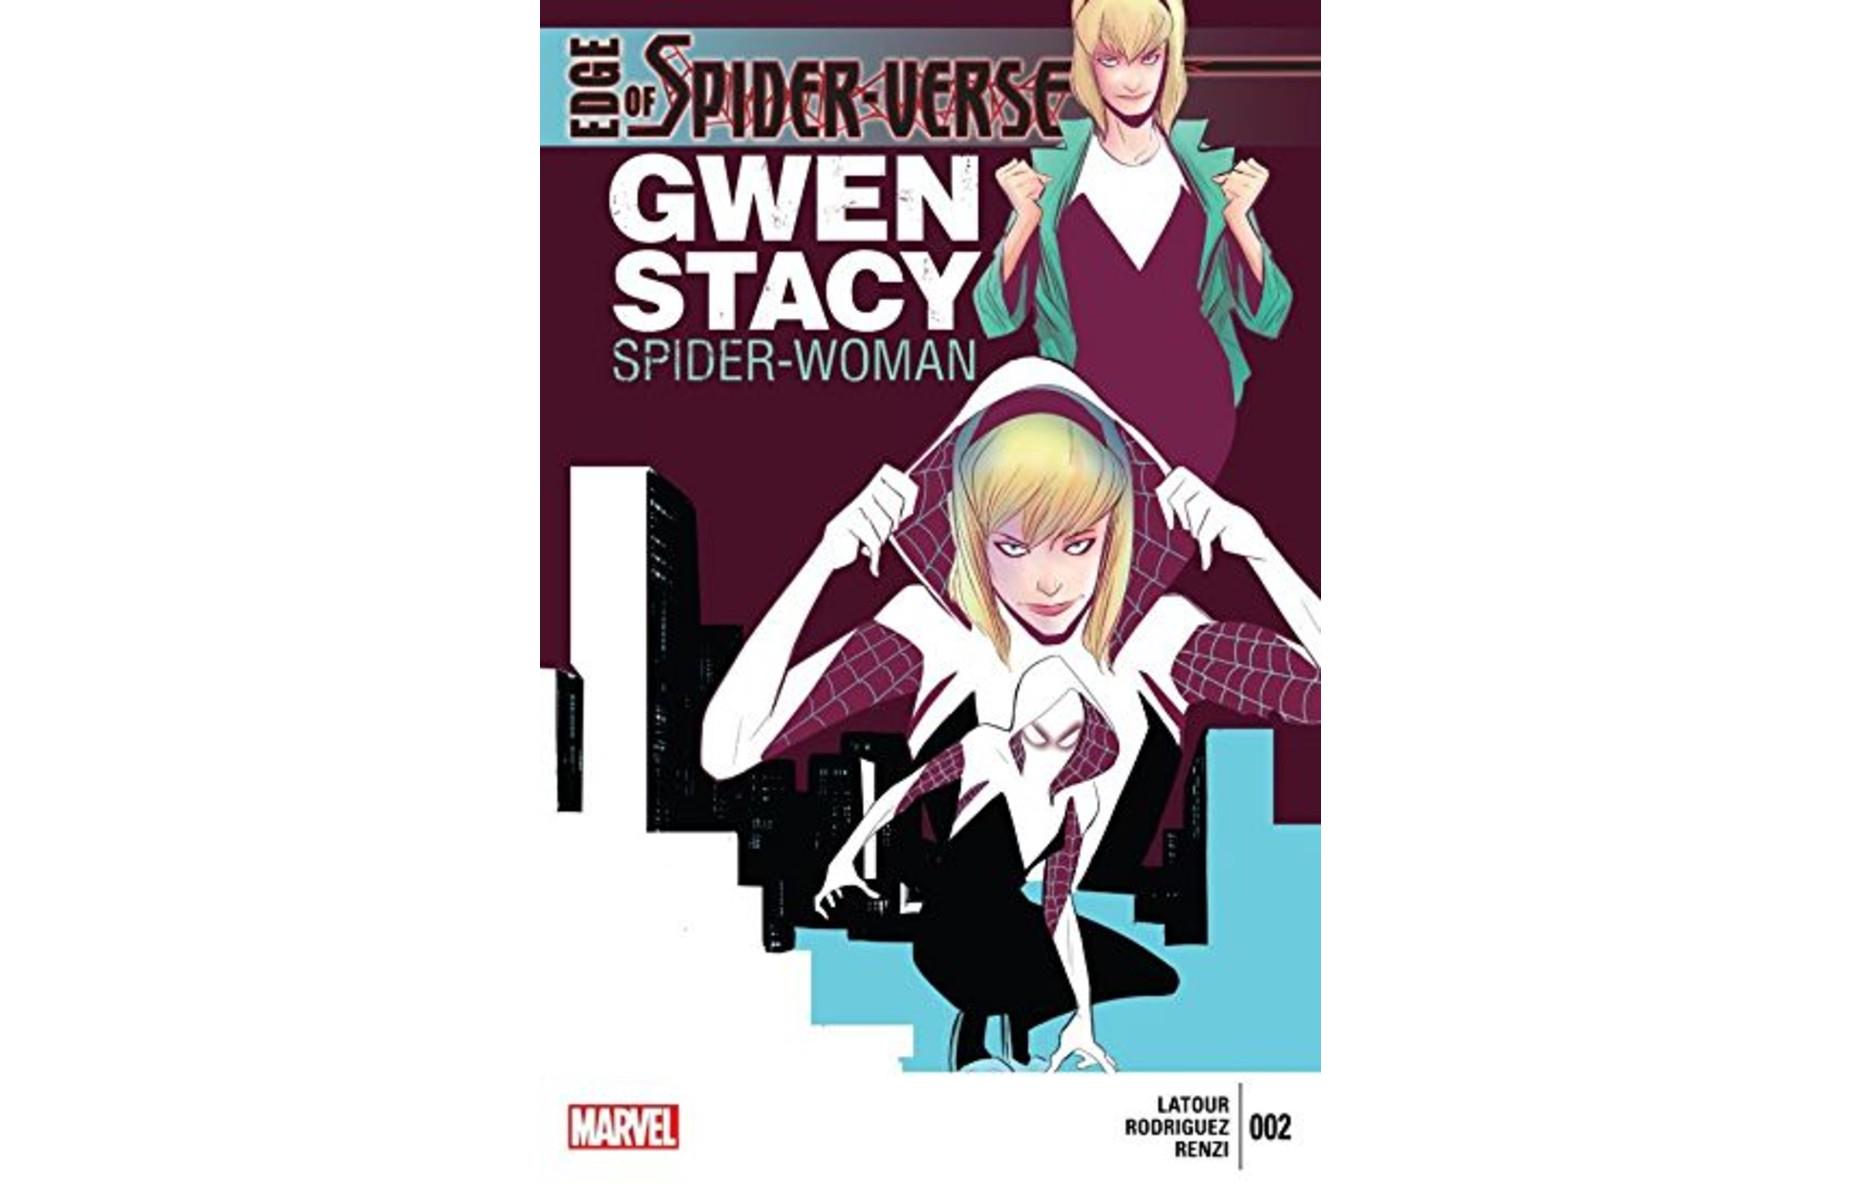 Edge of Spider-Verse #2: up to £400 ($520)